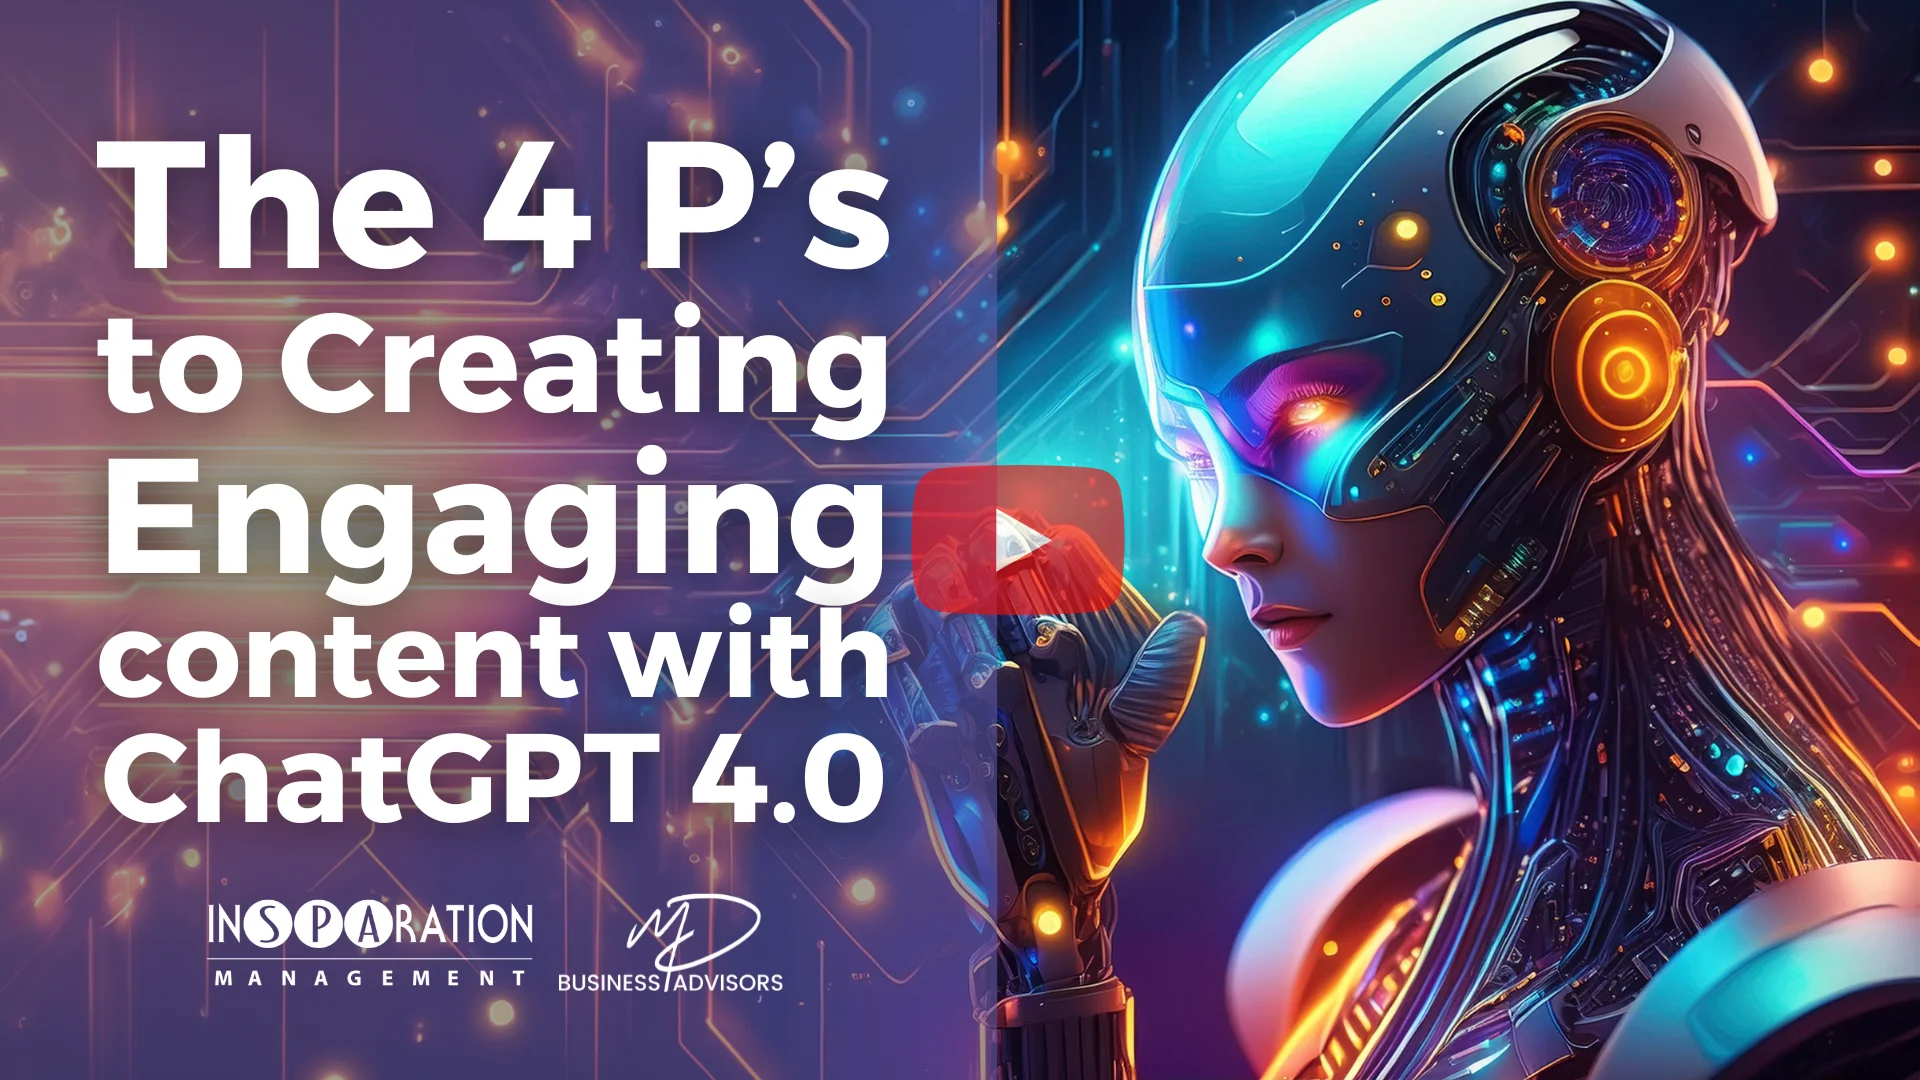 The 4 P’s to Creating Engaging Content with ChatGPT 4.0